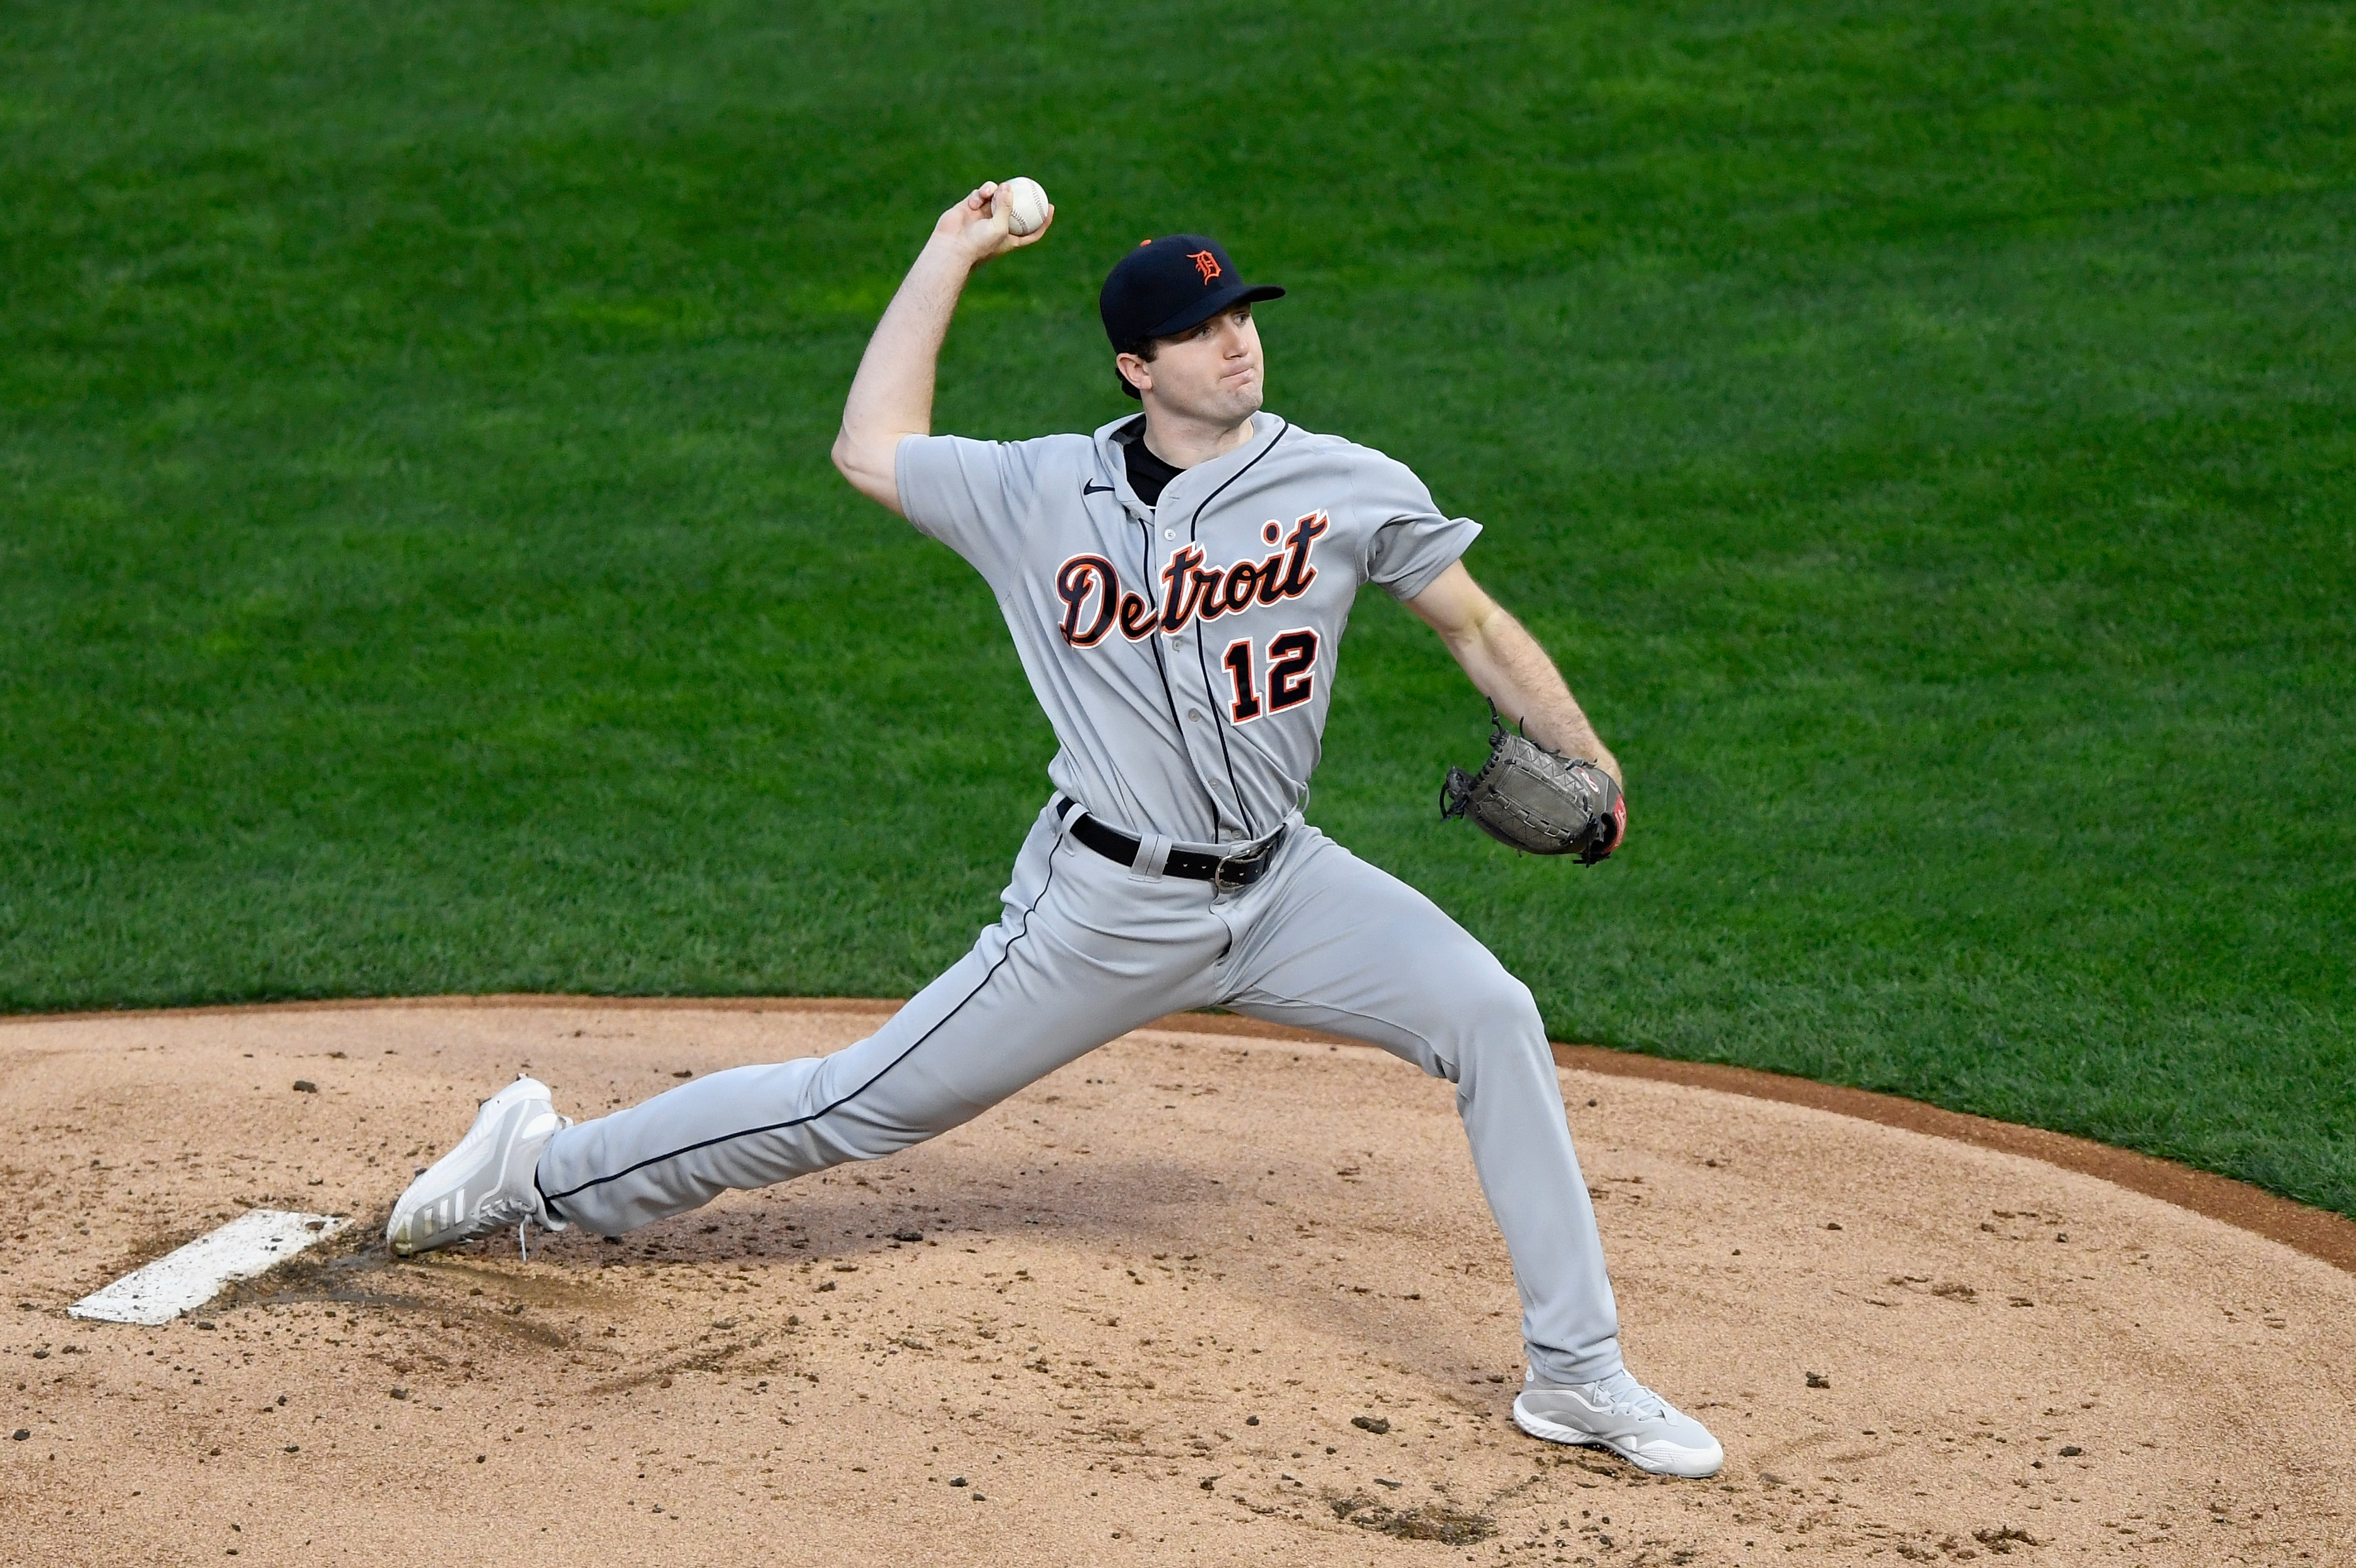 Detroit Tigers open thread: Should Casey Mize pitch in the majors